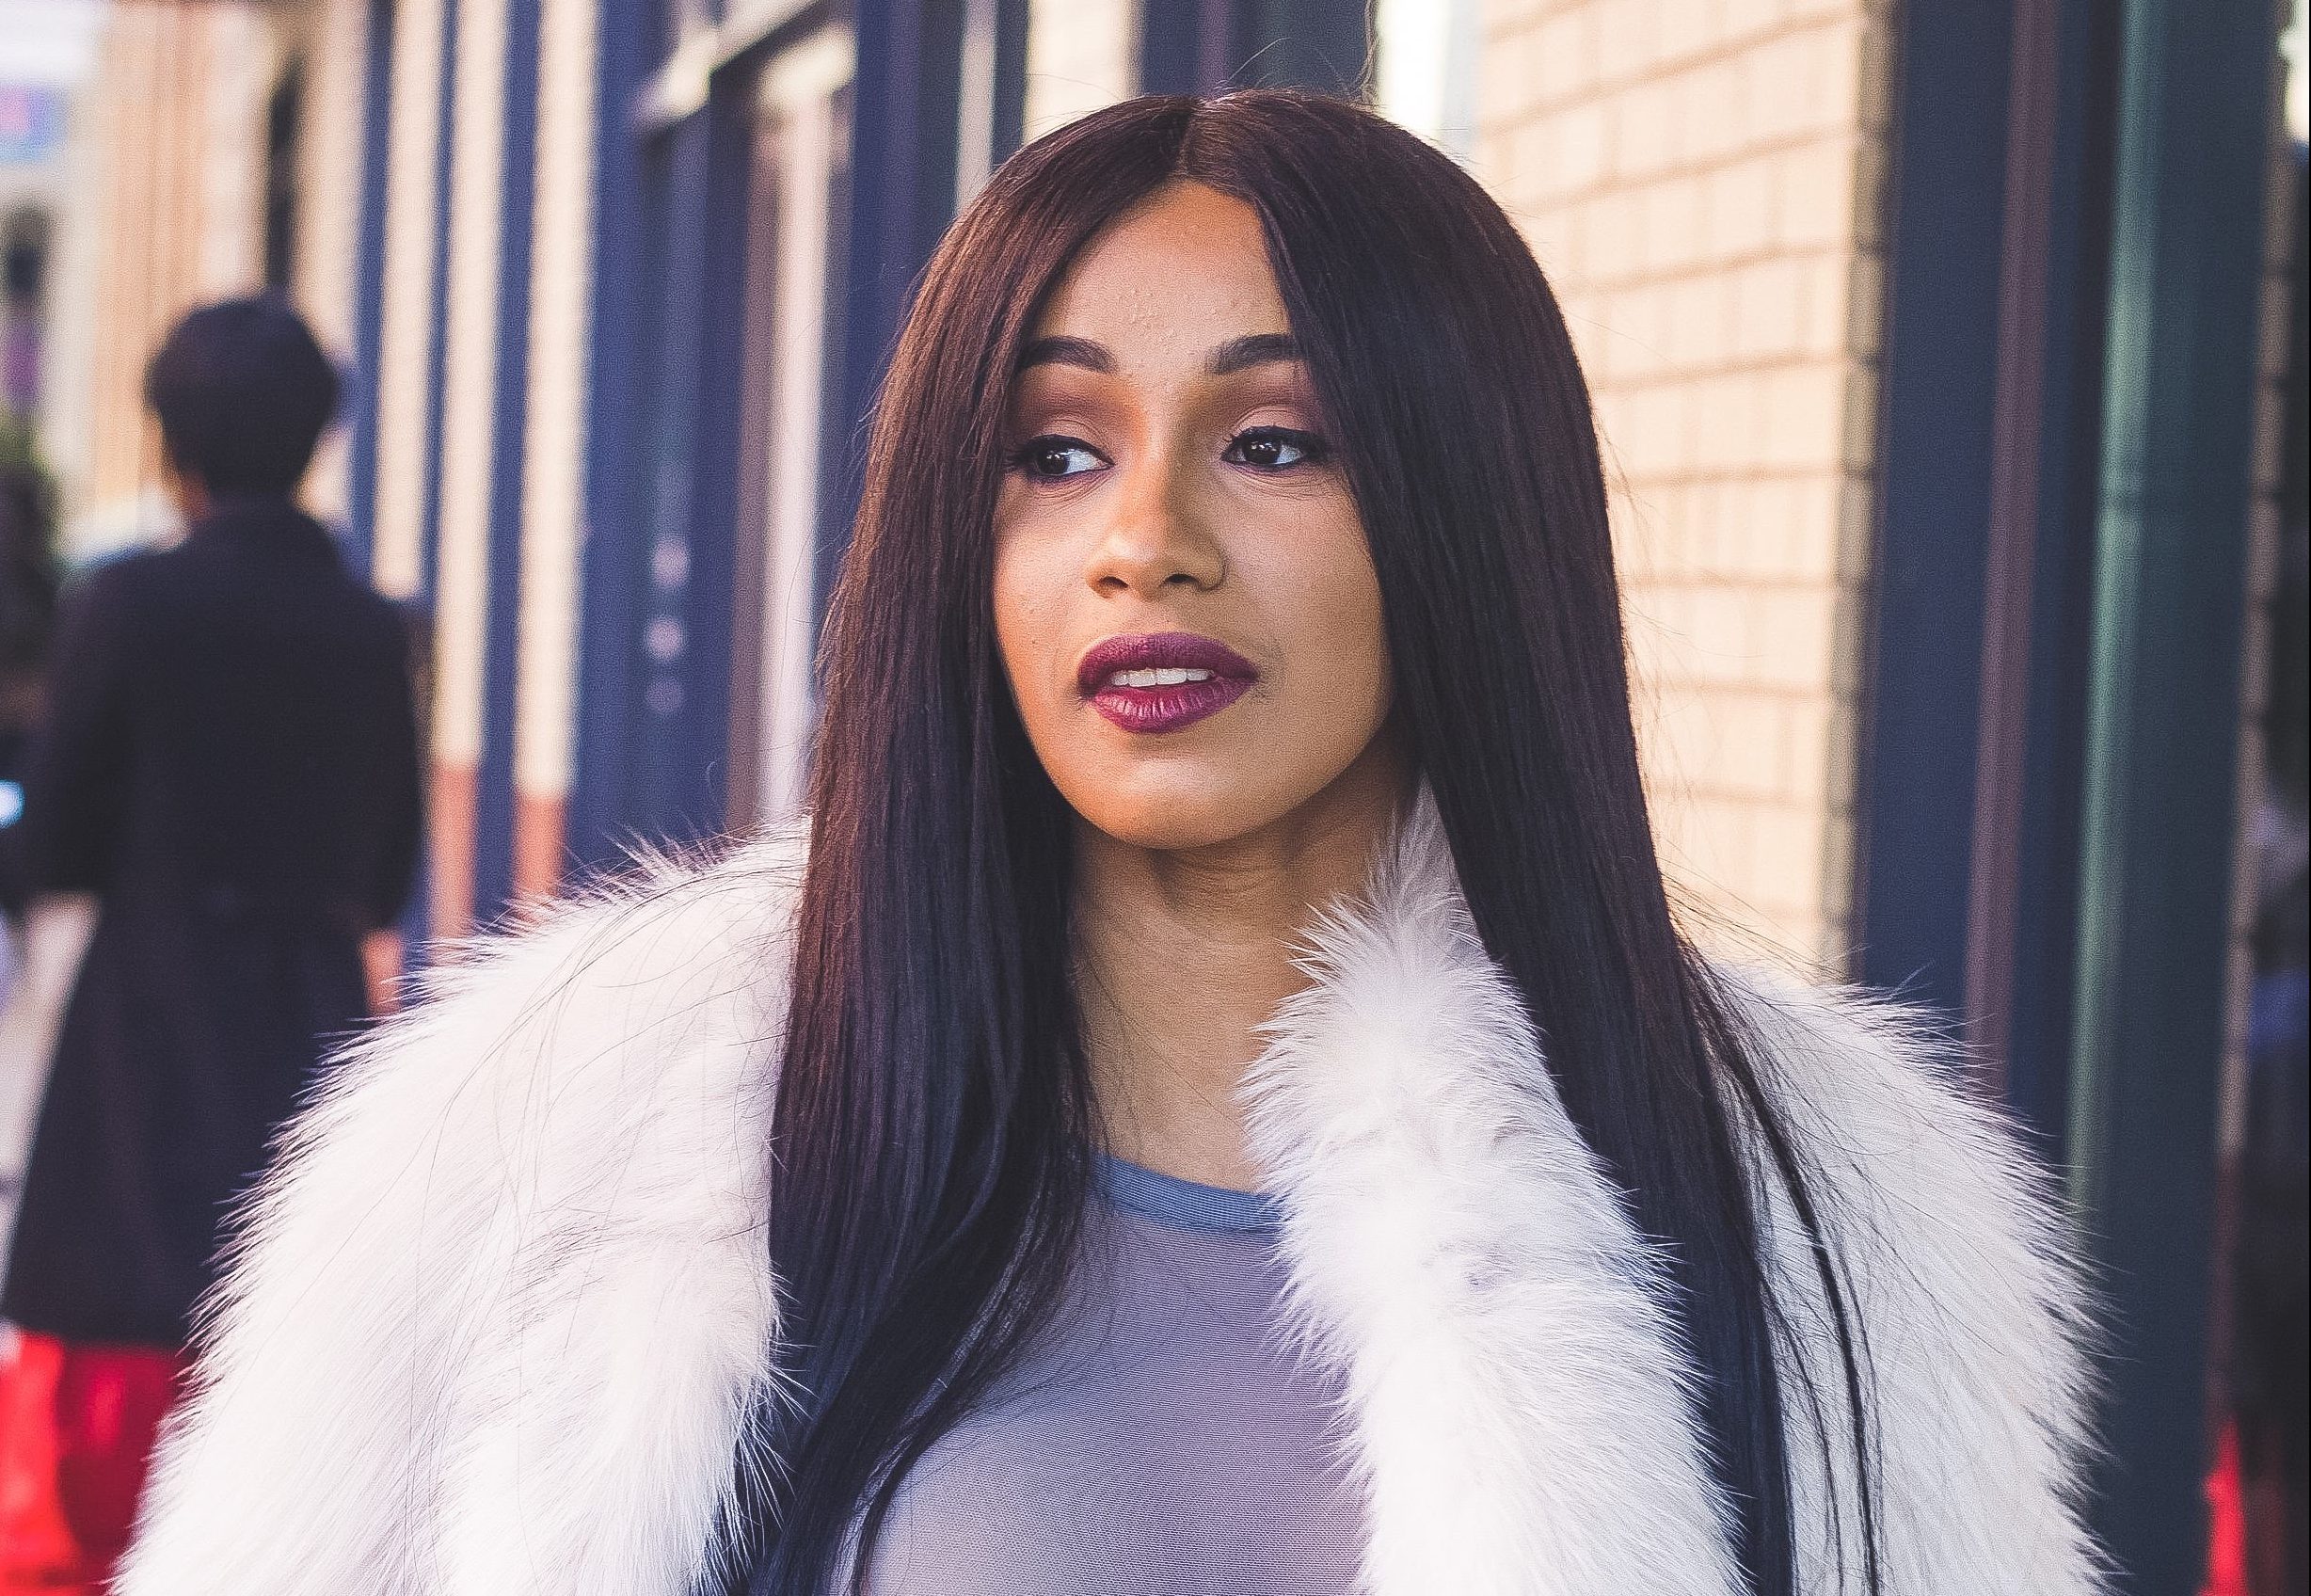 Cardi B Responds To Claims She Got Plastic Surgery Done On Her Face